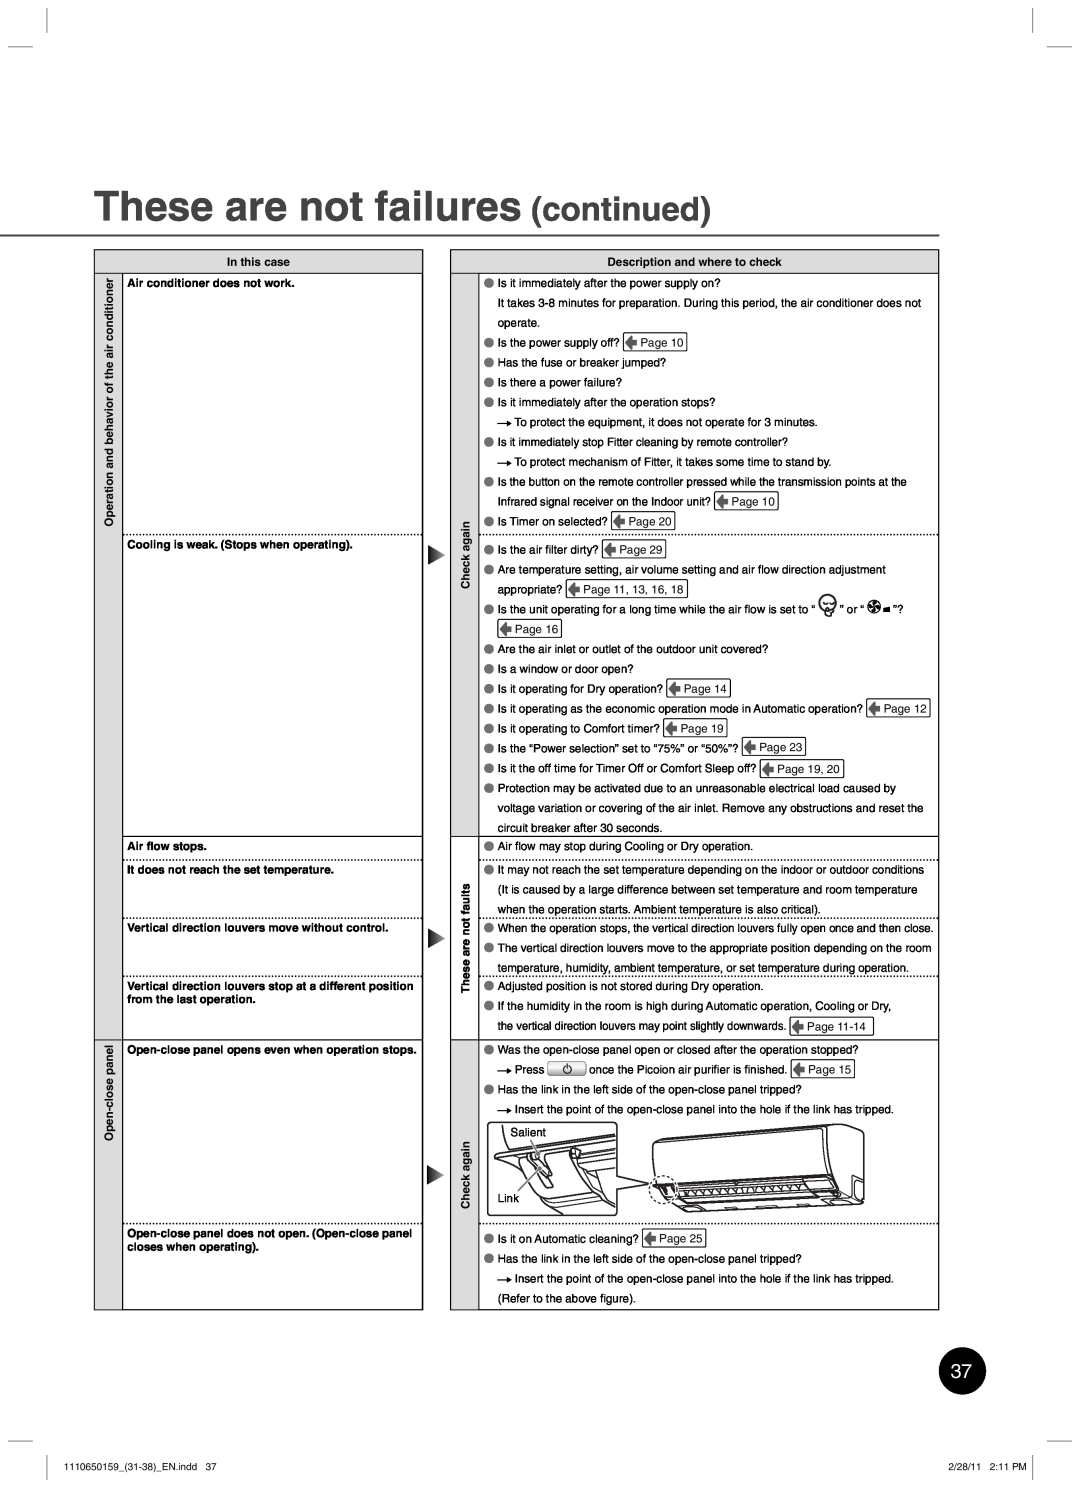 Toshiba RAS-10JKCVP owner manual These are not failures continued 